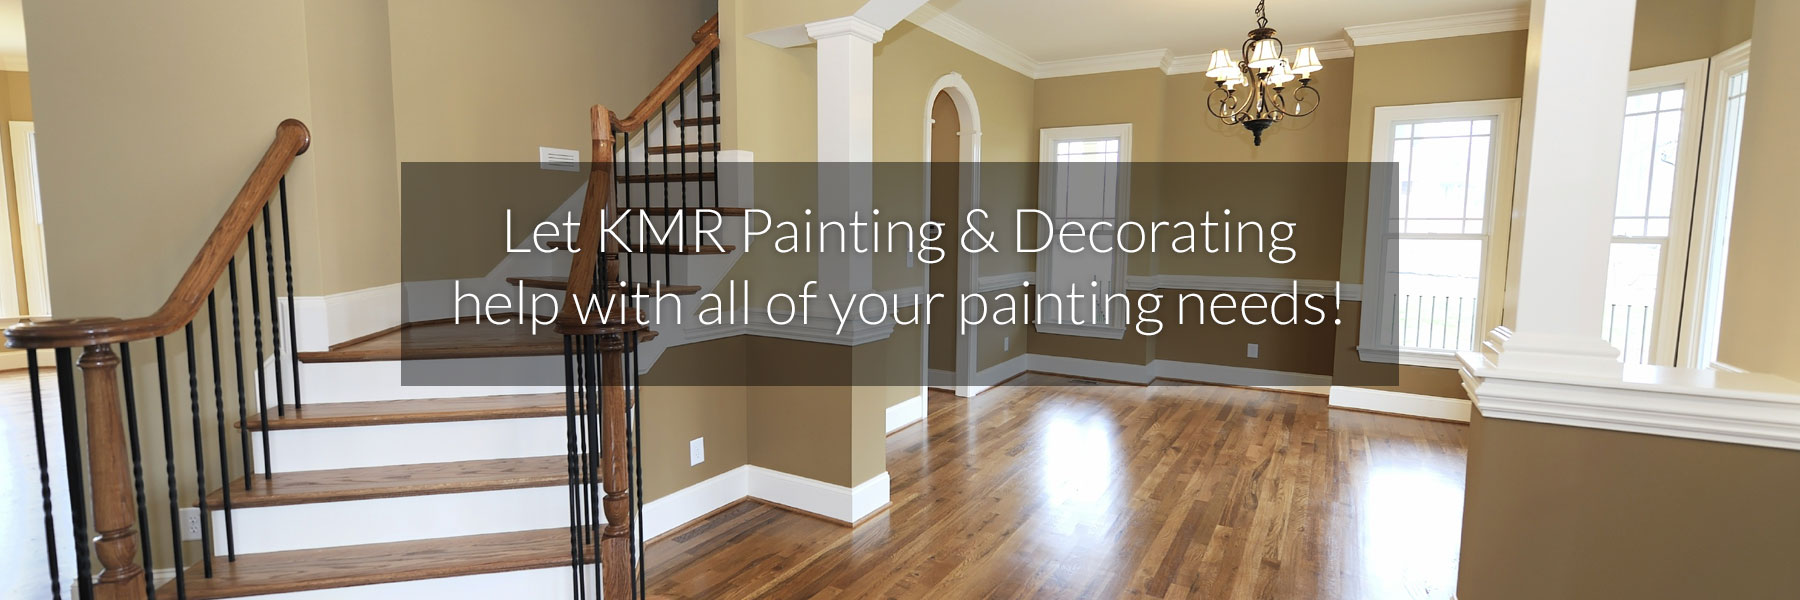 KMR Painting & Decorating, Painters in Long Island, Huntington New York